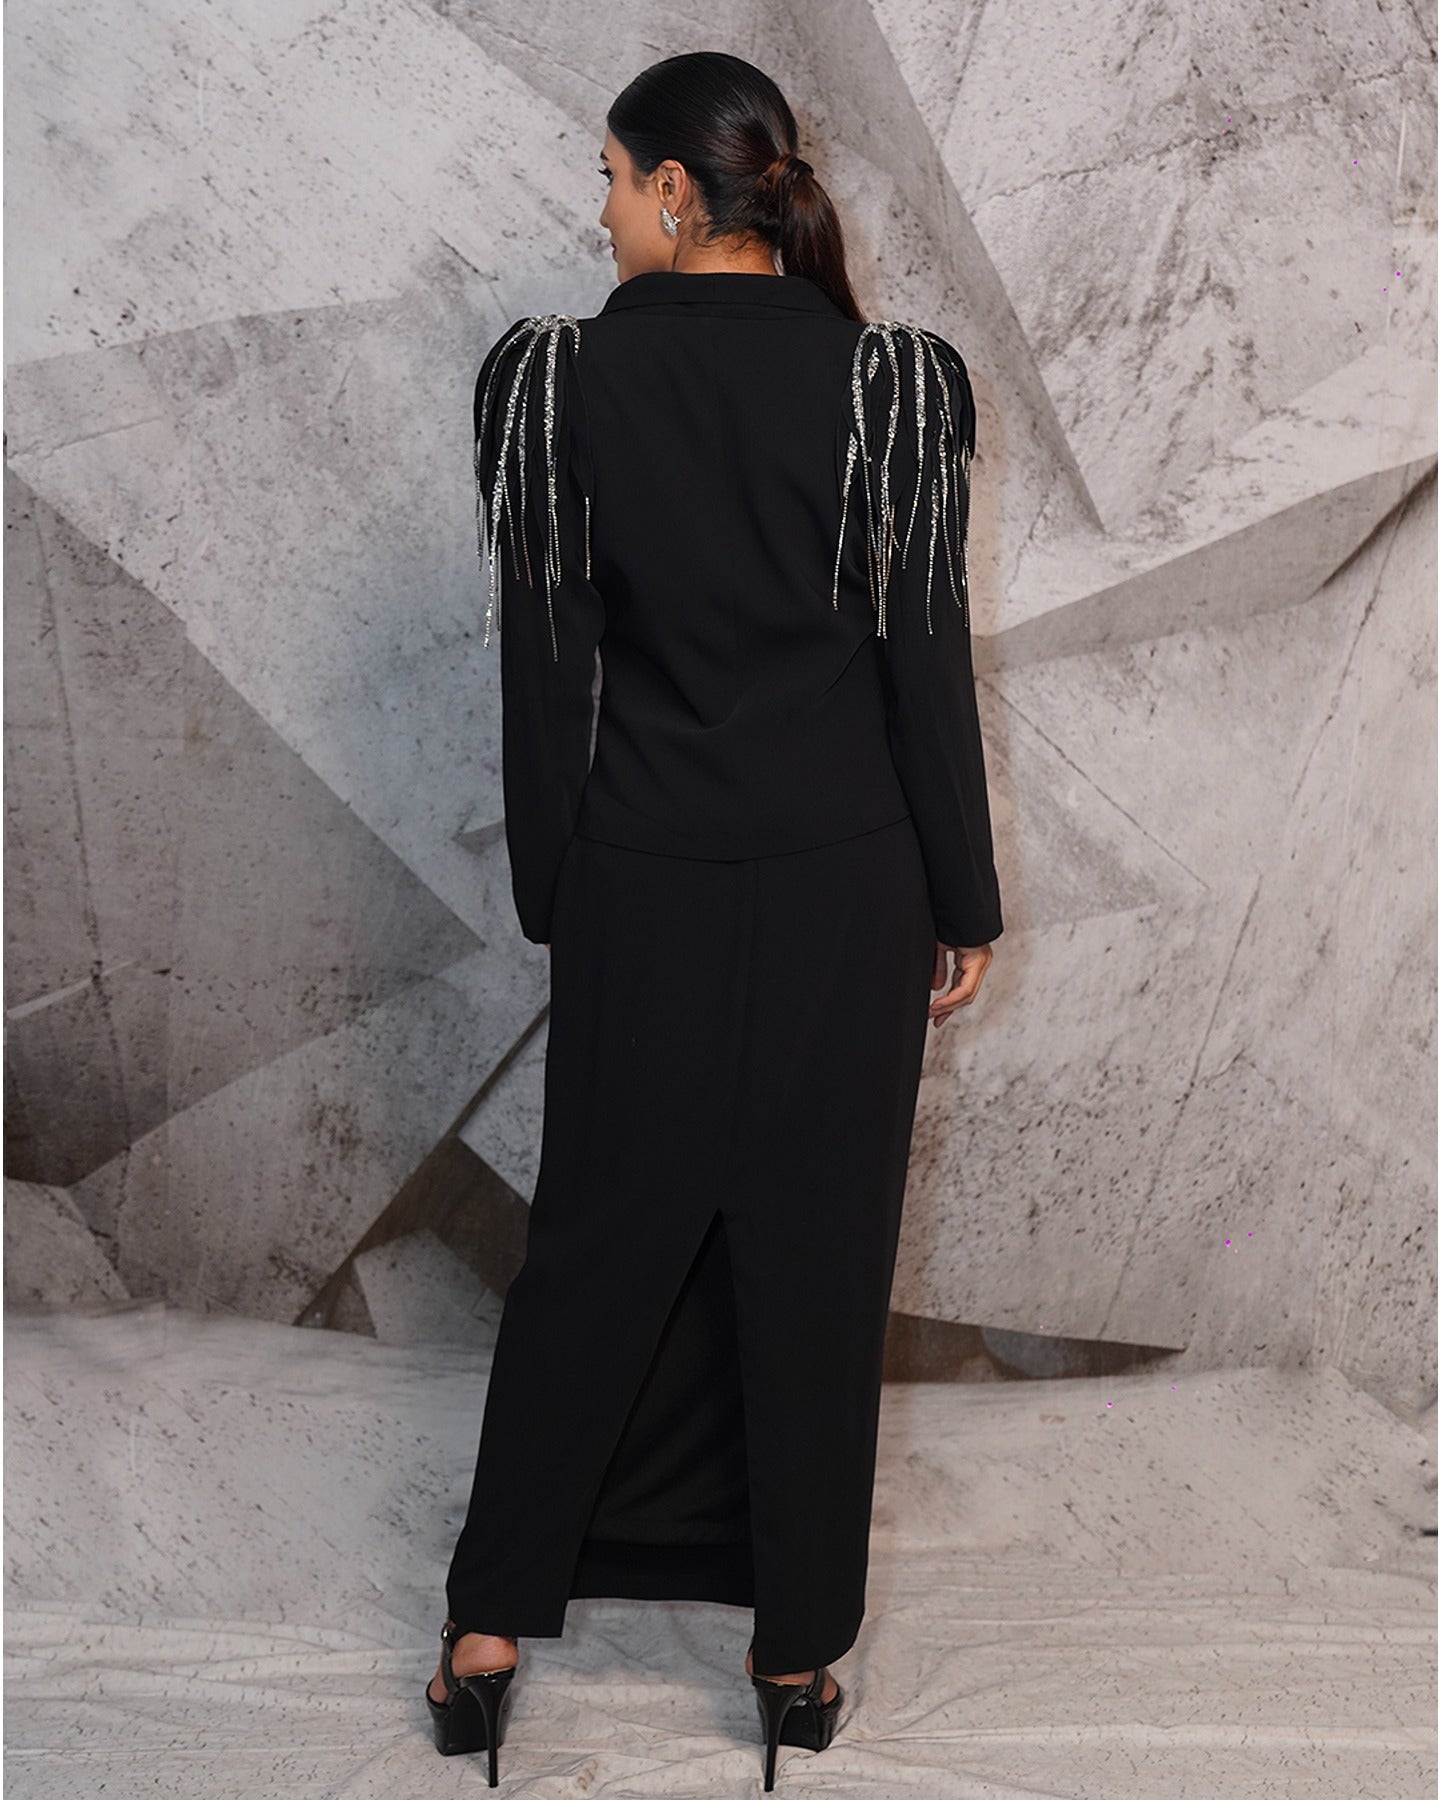 Elegance in every thread, strength in every silhouette. This black blazer suit exudes power and style, making every step a statement of confidence. 